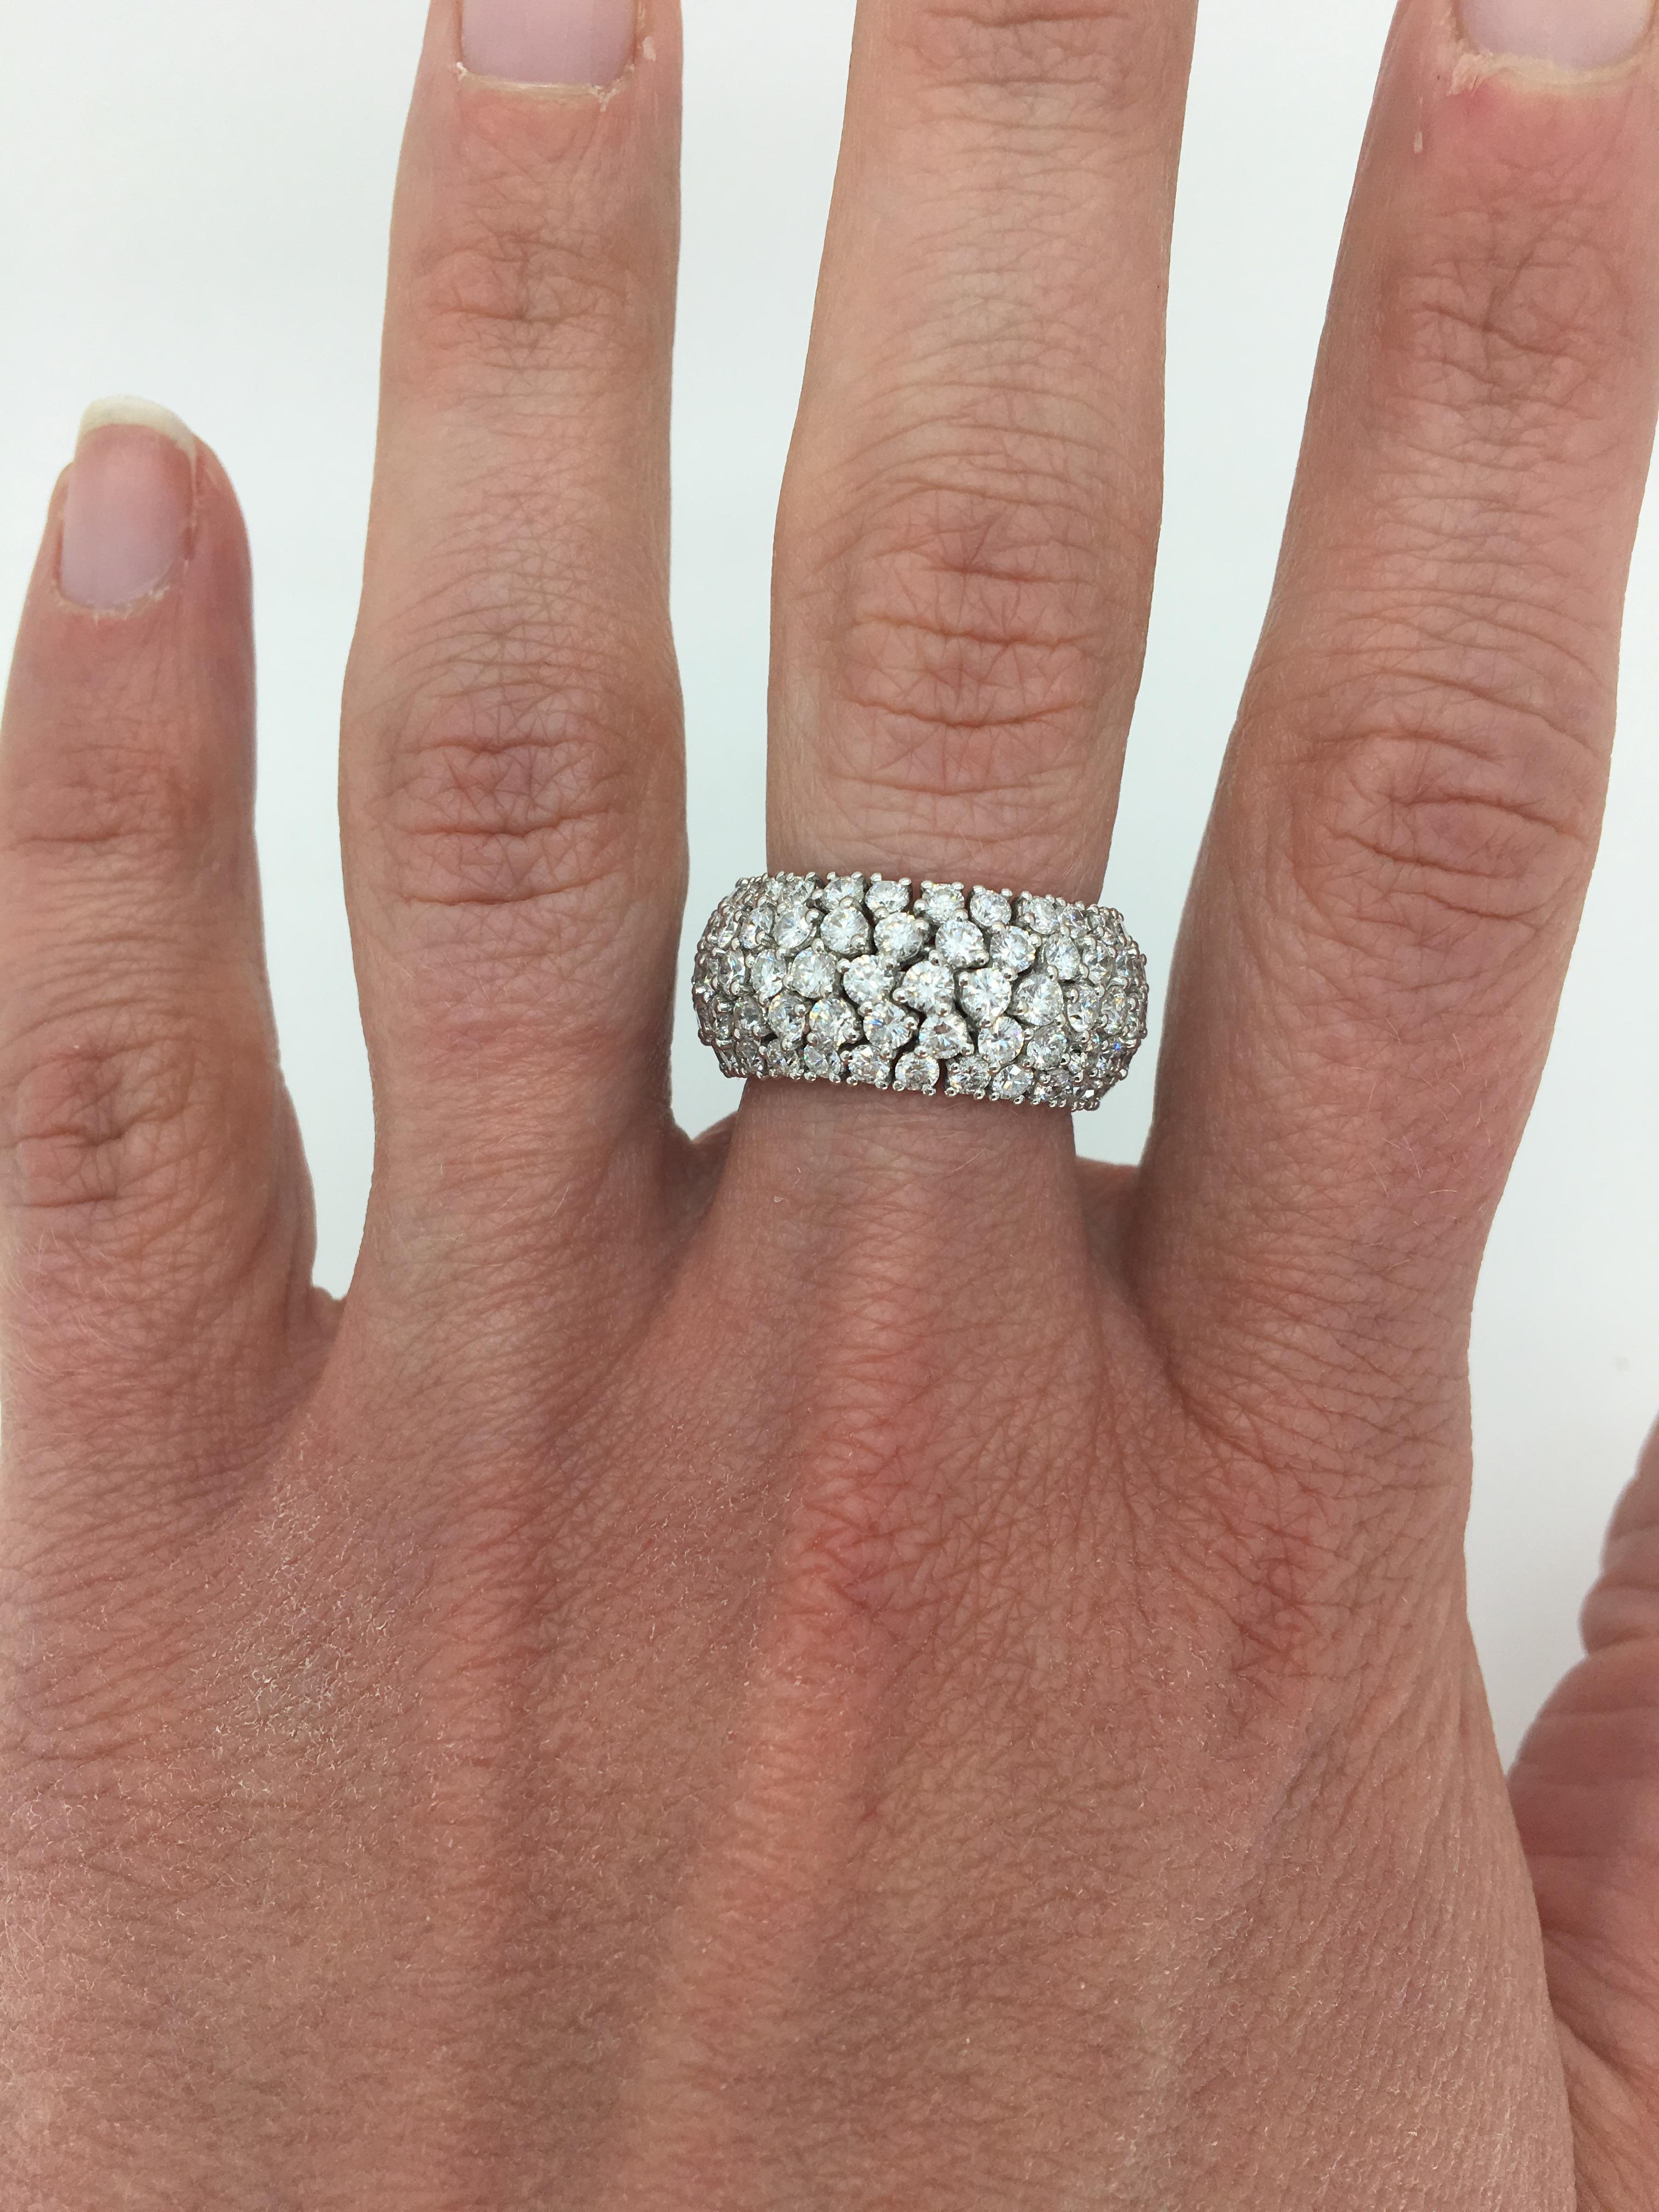 This glamorous Diamond ring features approximately 5.60CTW of Round Brilliant Cut Diamonds set in a unique eternity style band that has movement for a perfect comfort fit.

Diamond Carat Weight: Approximately 5.60CTW
Diamond Cut: 140 Round Brilliant